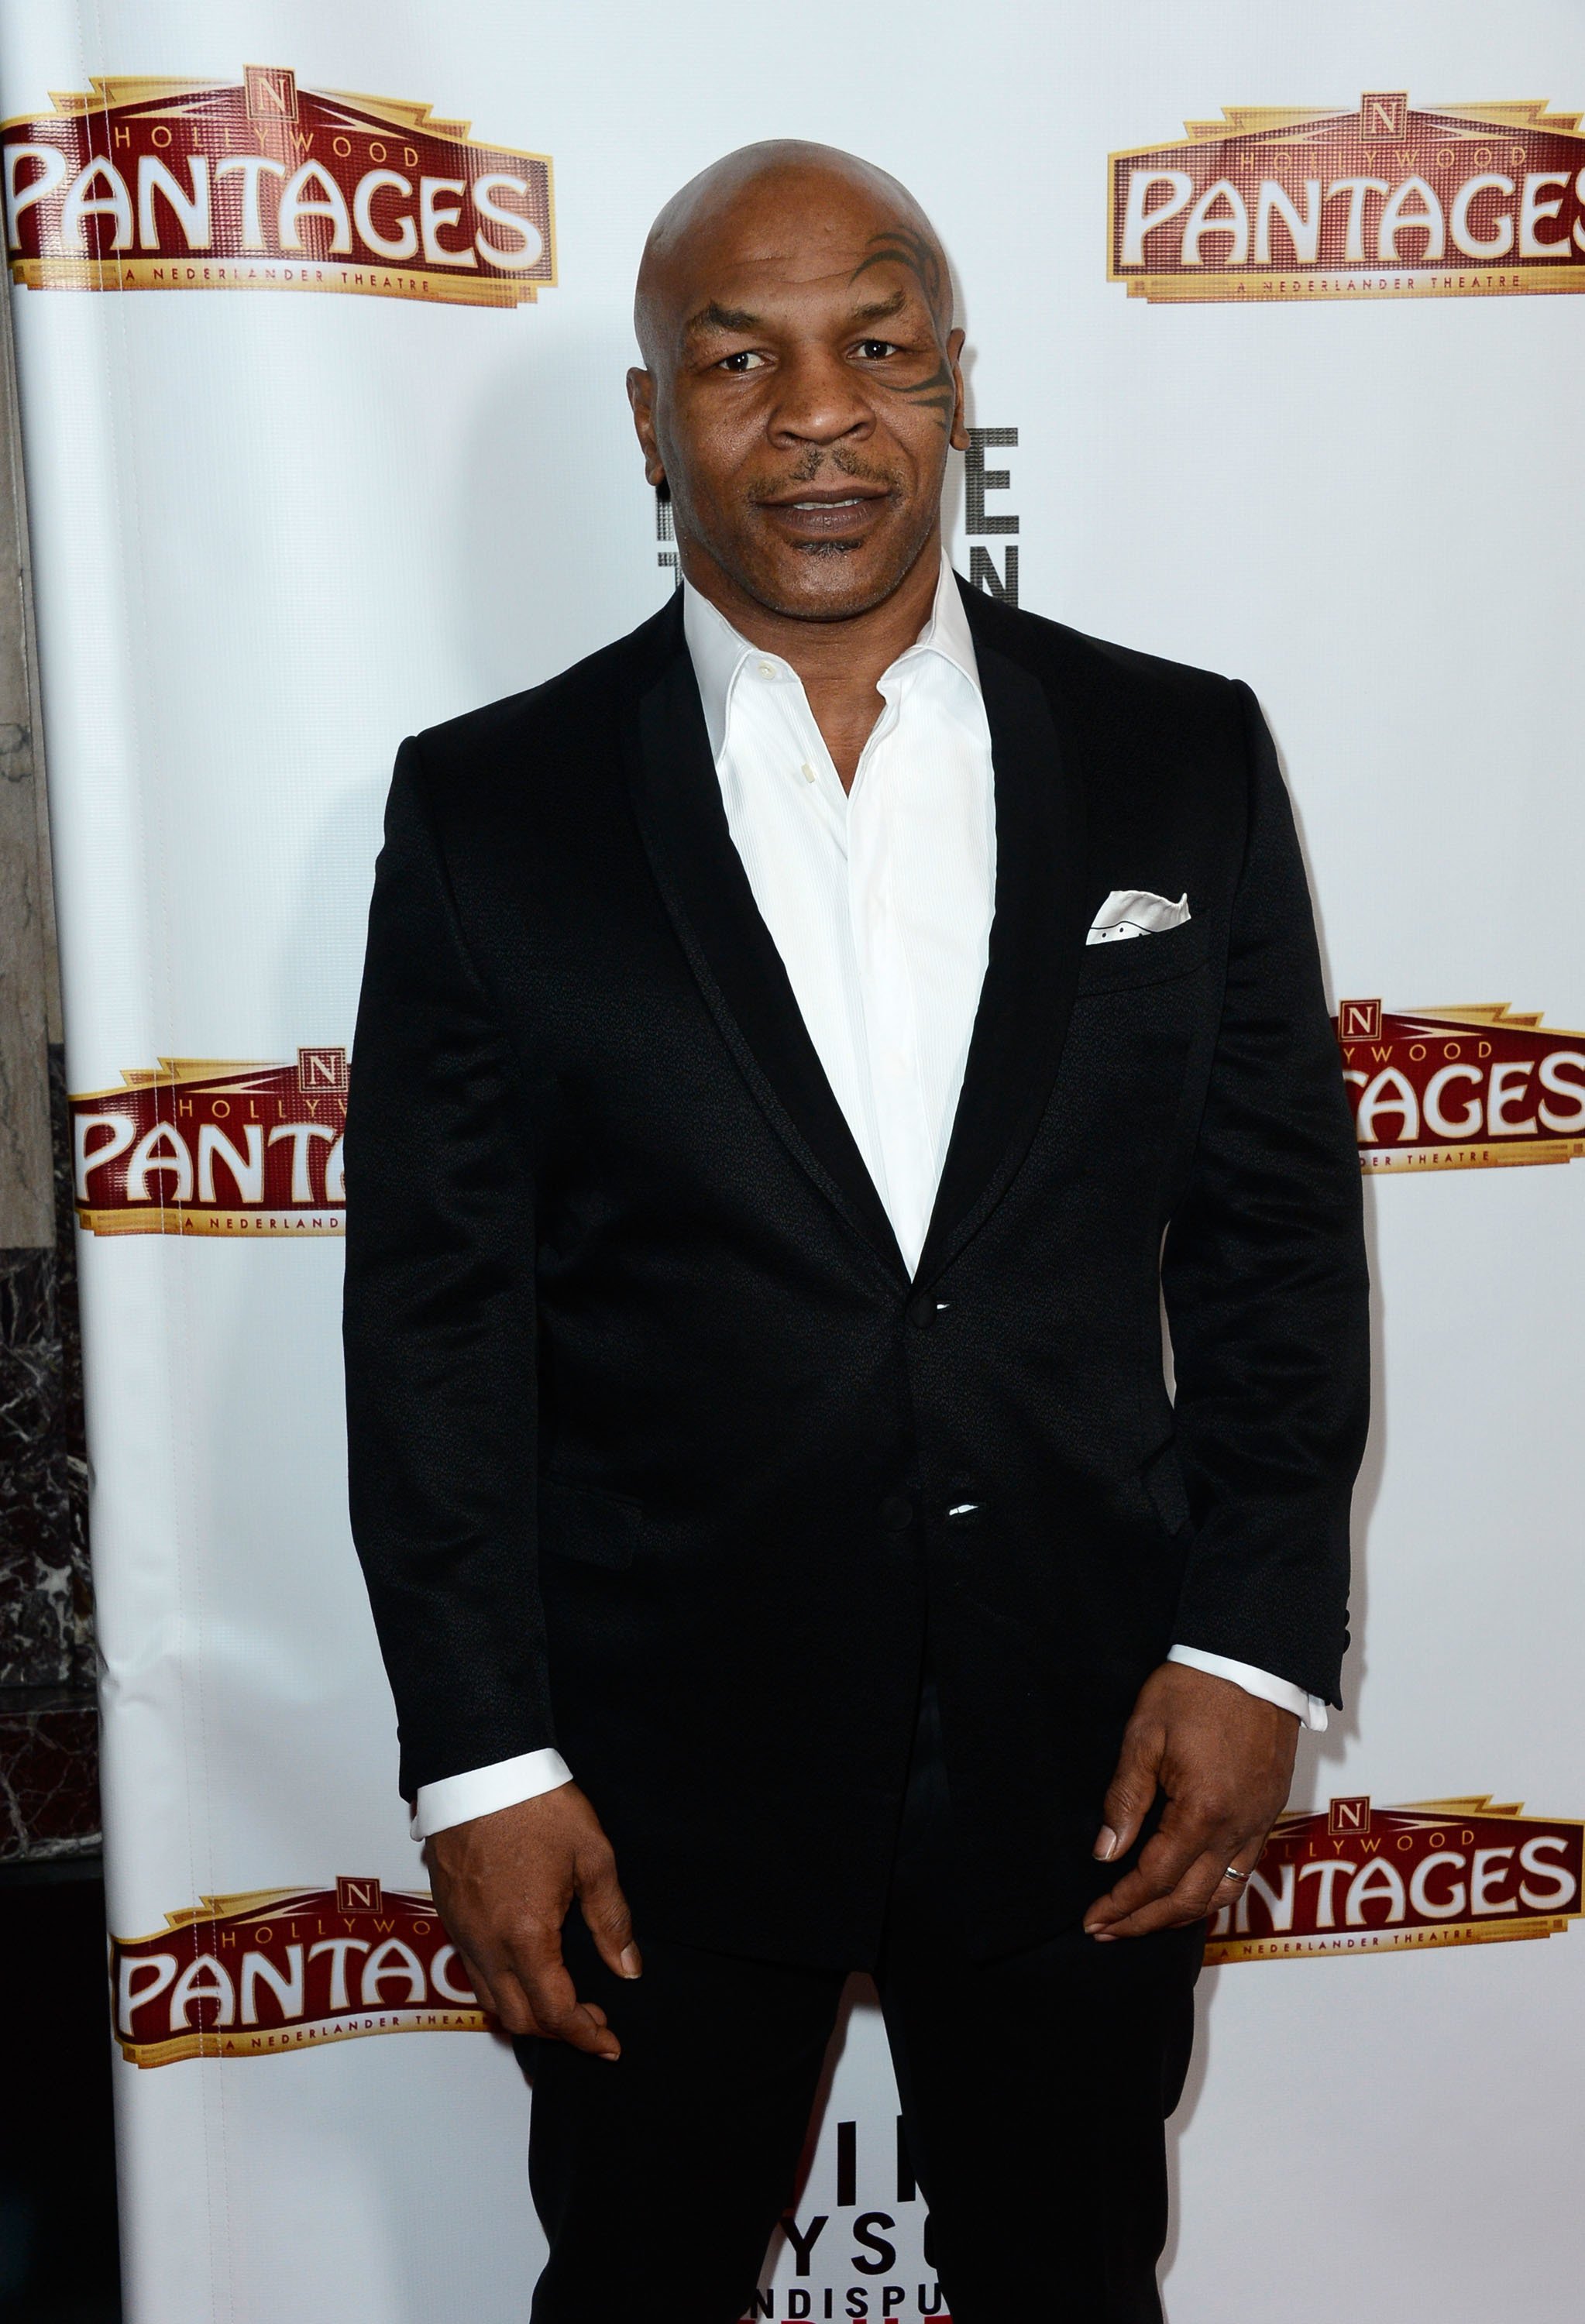 Mike Tyson arrives at the Pantages Theatre on March 8, 2013 in Hollywood, California | Photo: Getty Images